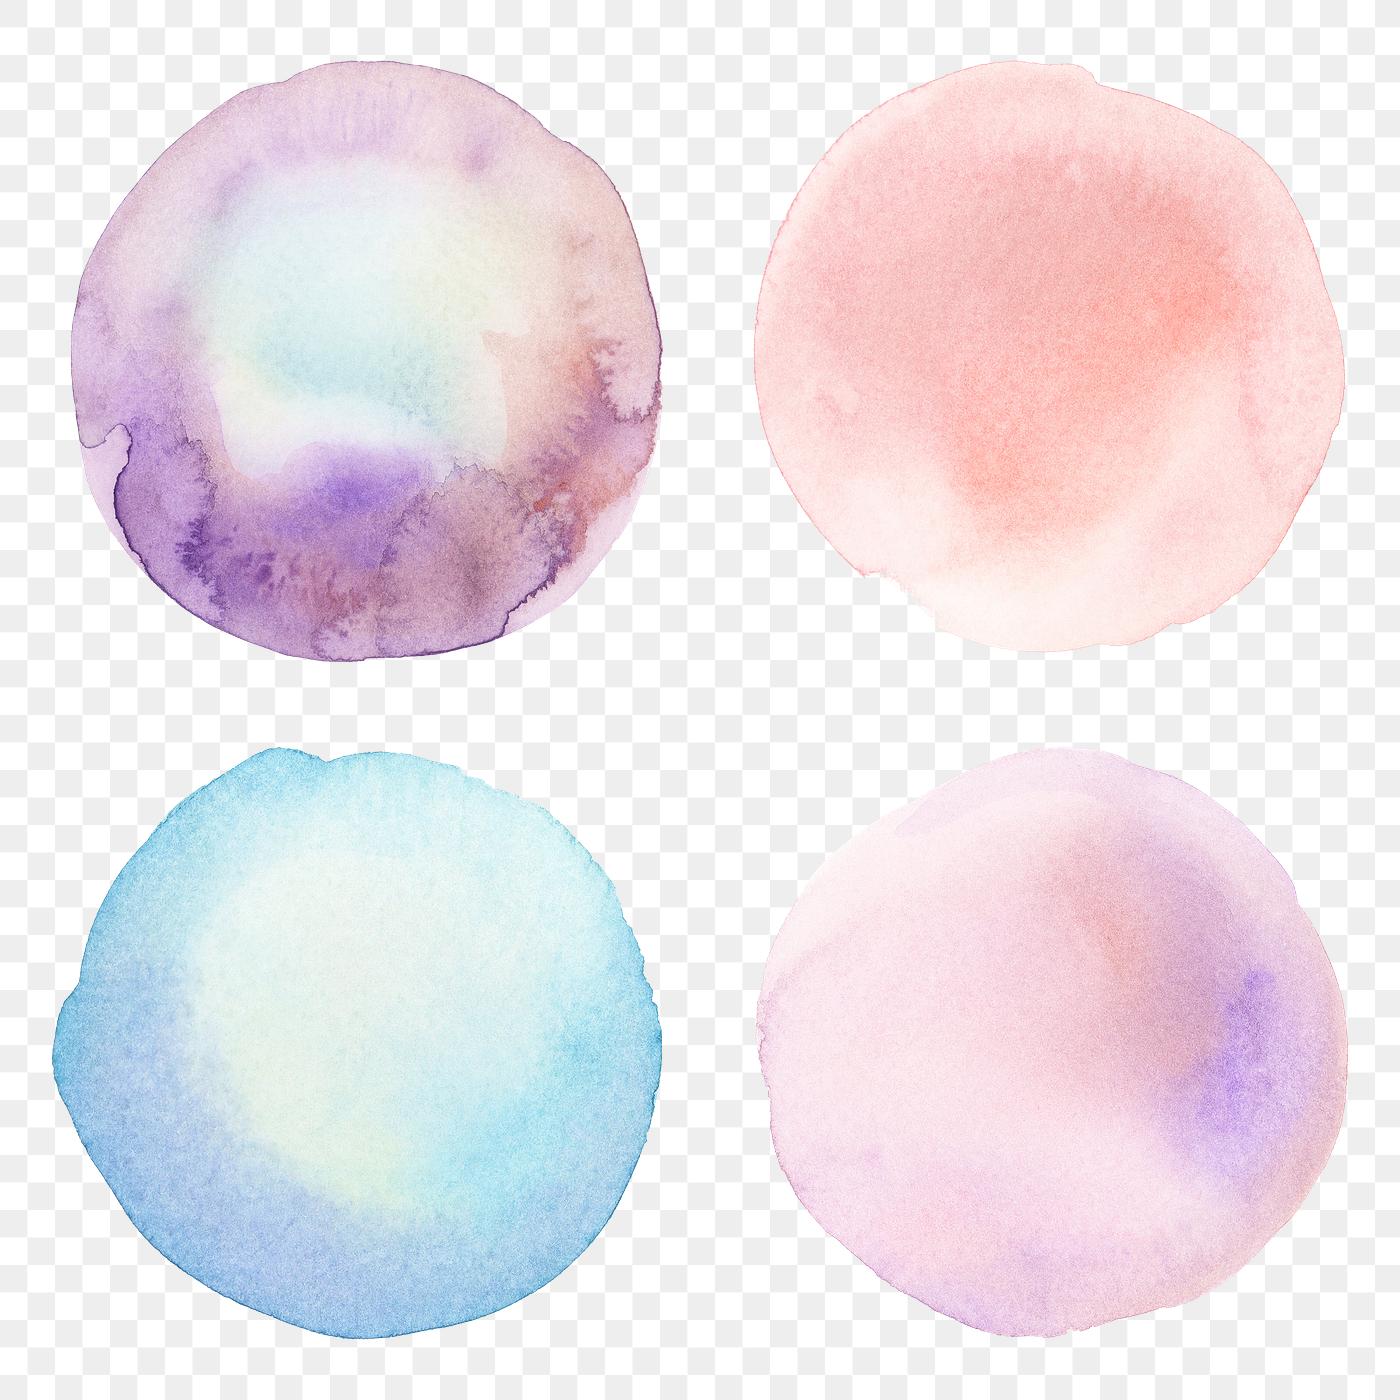  Round  watercolor  badges png  Free transparent png  2044782